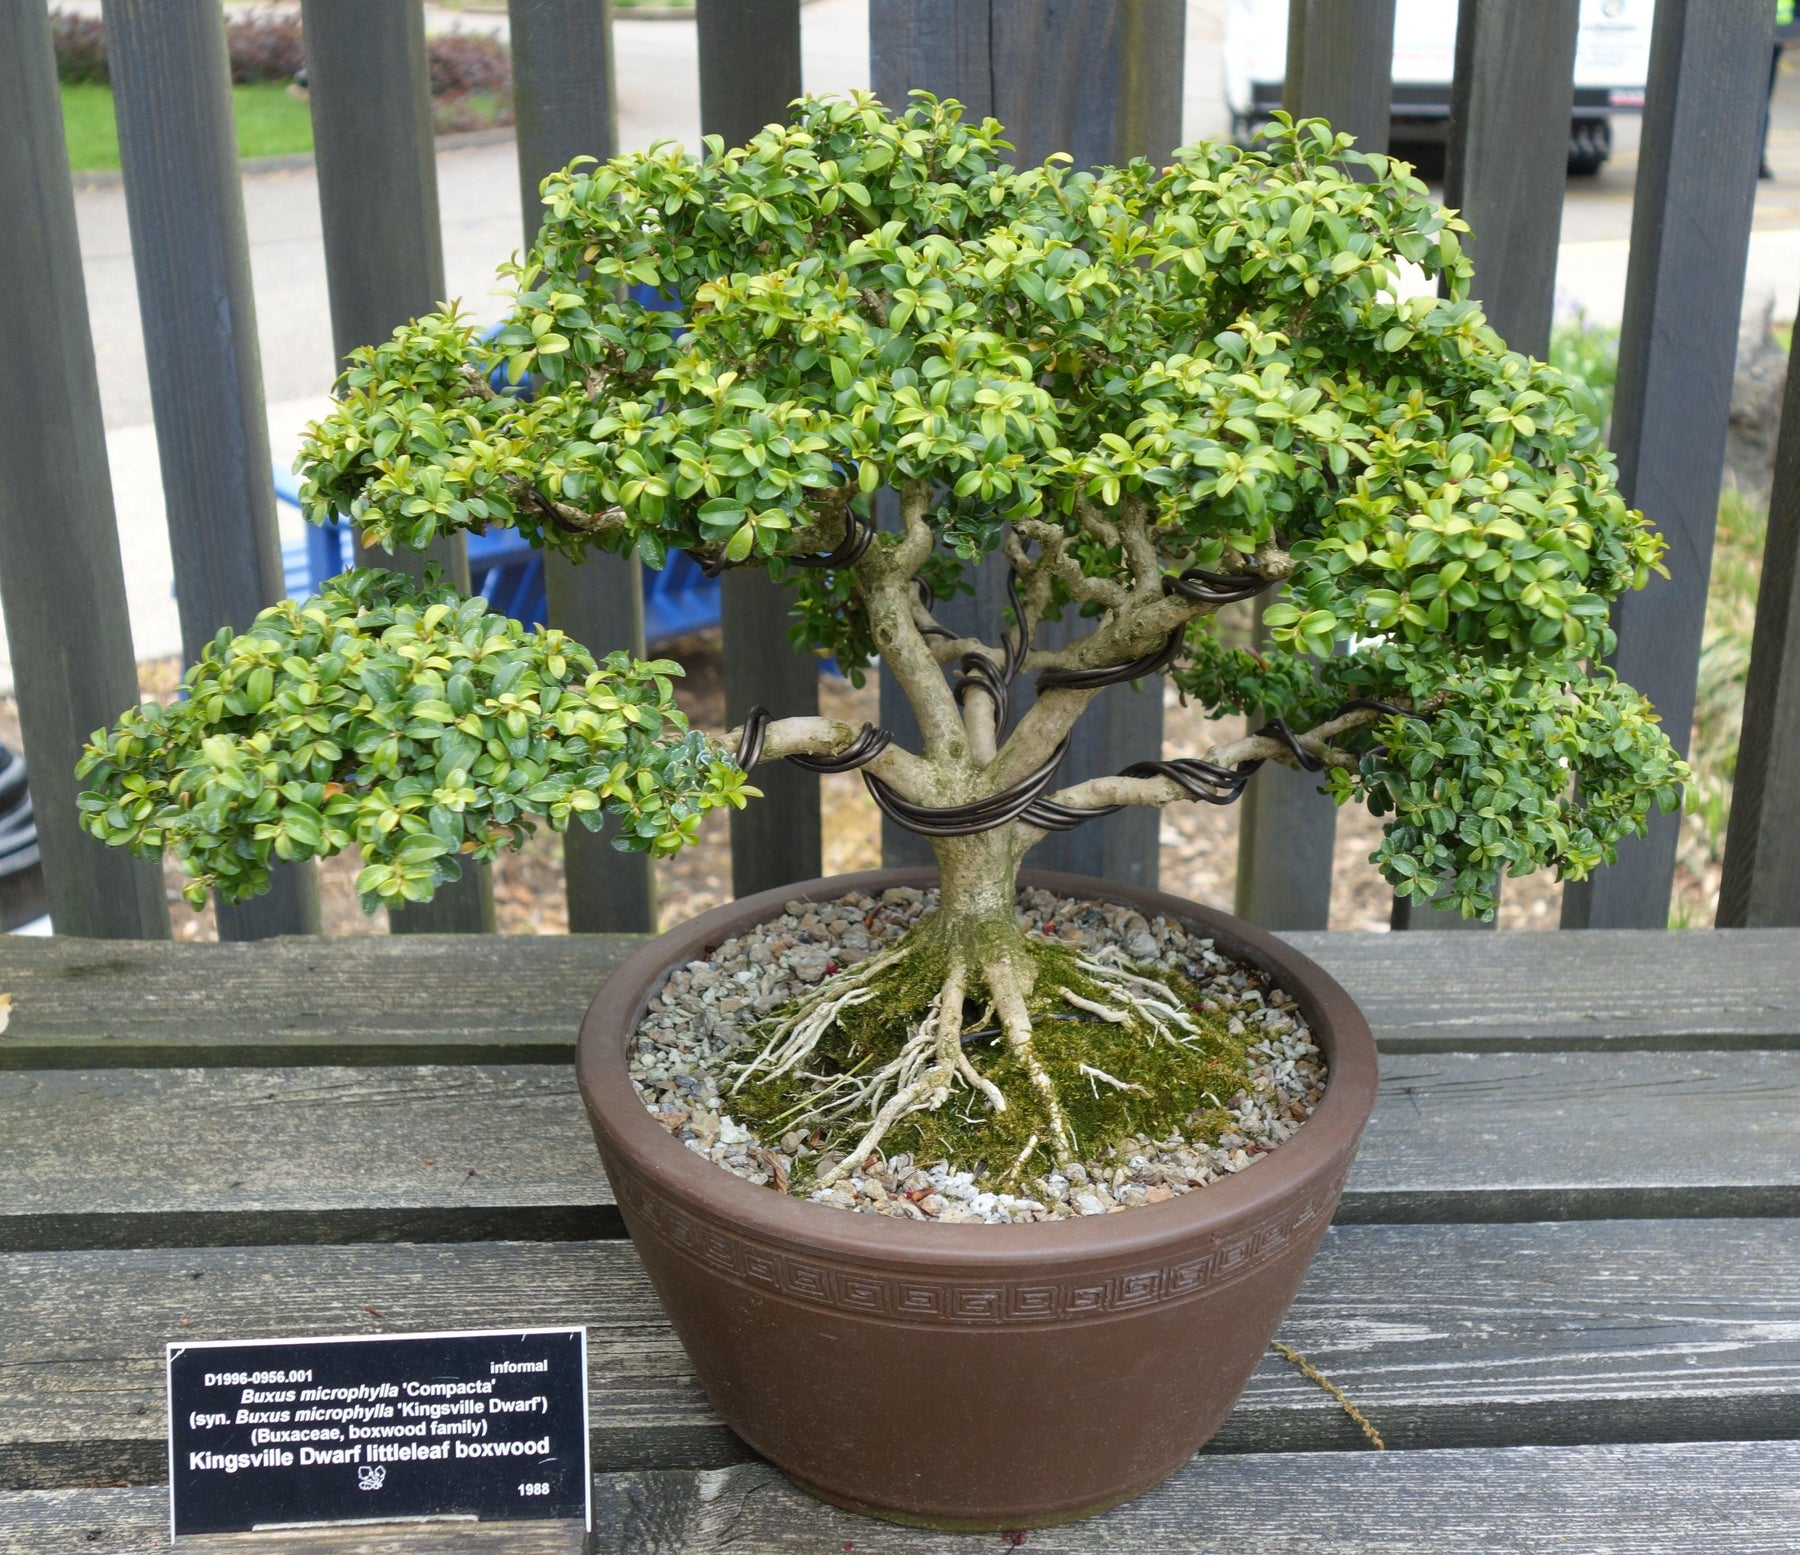 How To Care For Your Kingsville Boxwood Bonsai Tree